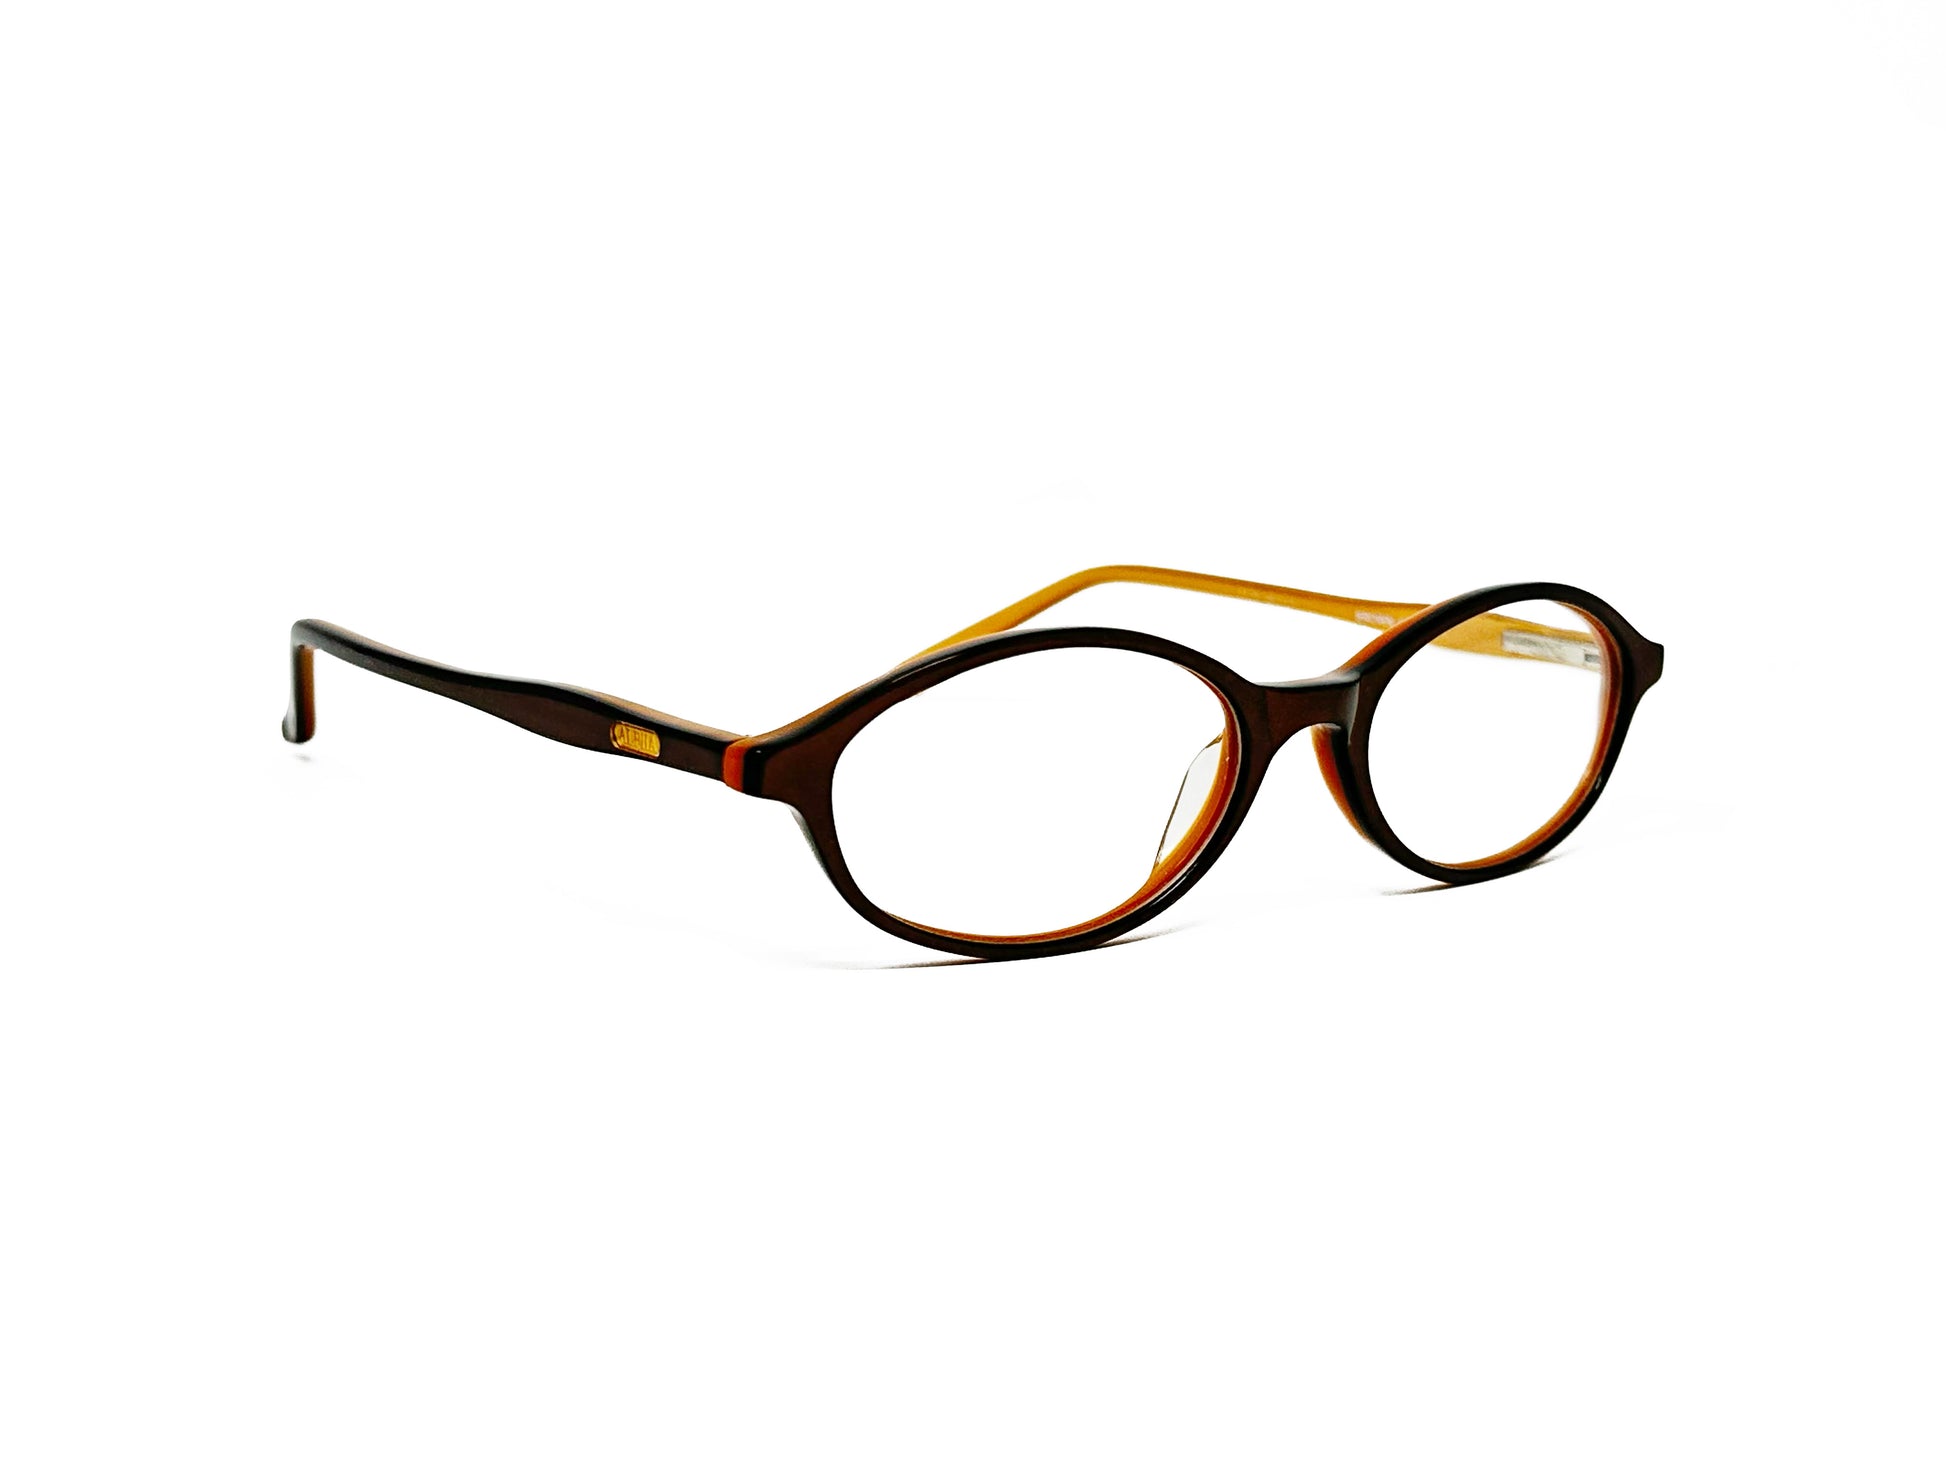 Alpha oval, acetate, optical frame. Model: 0338. Color: Brown C64 - Brown with cream inside. Side view.